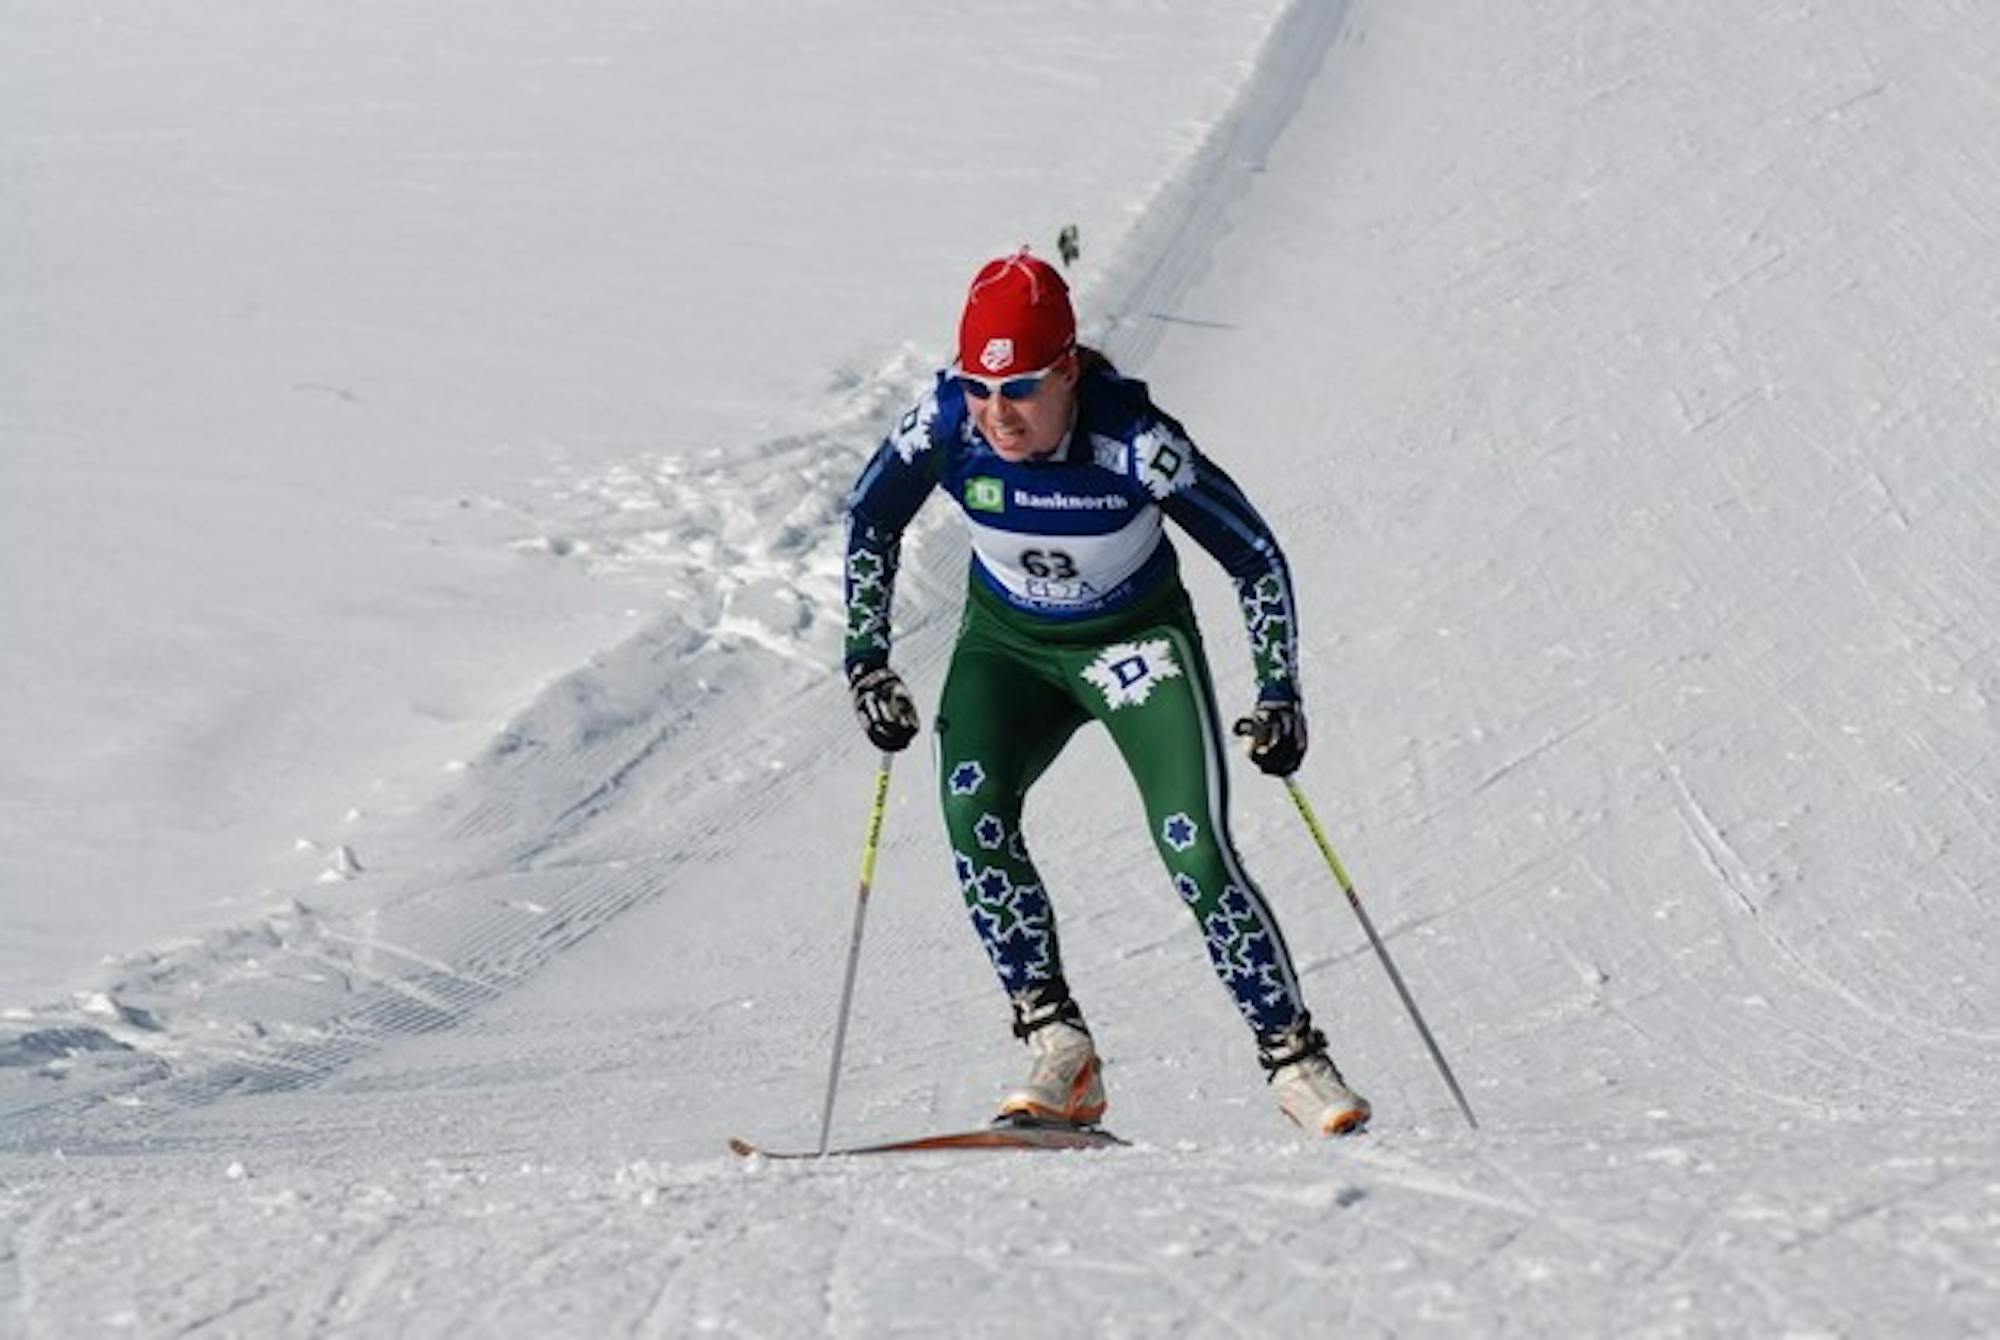 After falling behind the pace set by the University of New Hampshire on the first day of the competition, the Dartmouth ski team came back to win the UNH carnival with 901 total points.